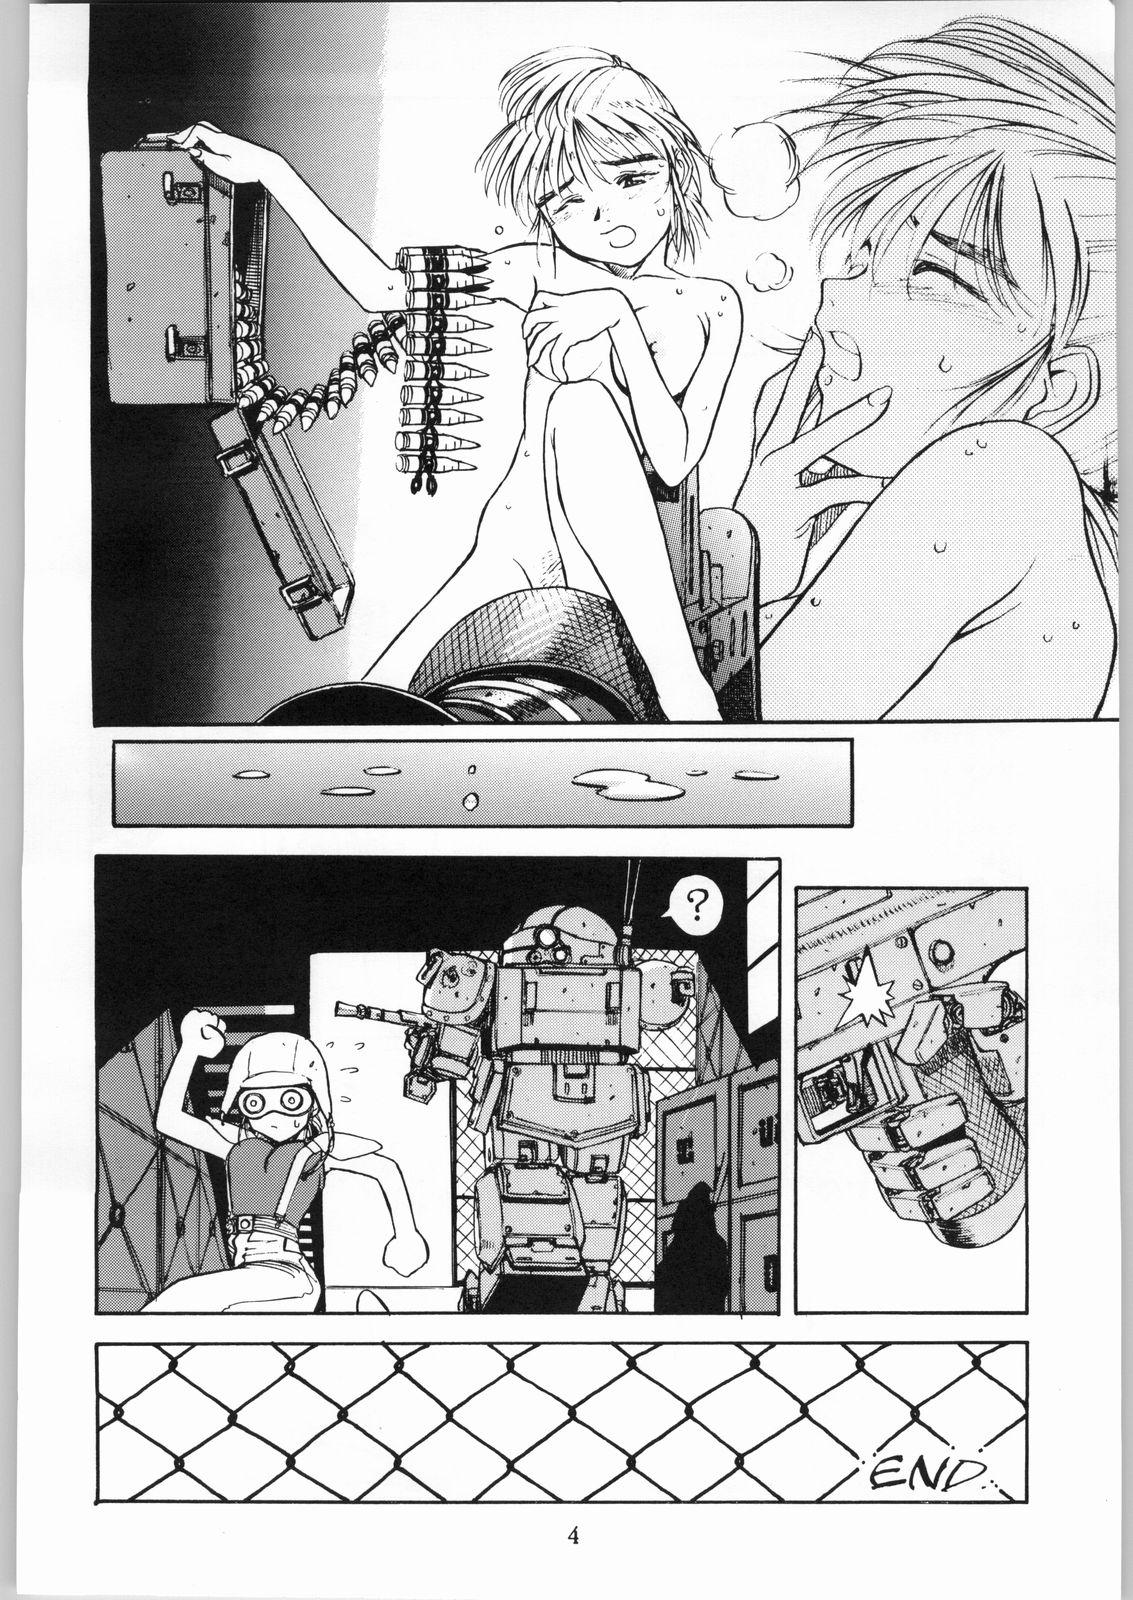 Family Taboo Kanojo No Juu - Final fantasy vii Ghost in the shell Jock - Page 5